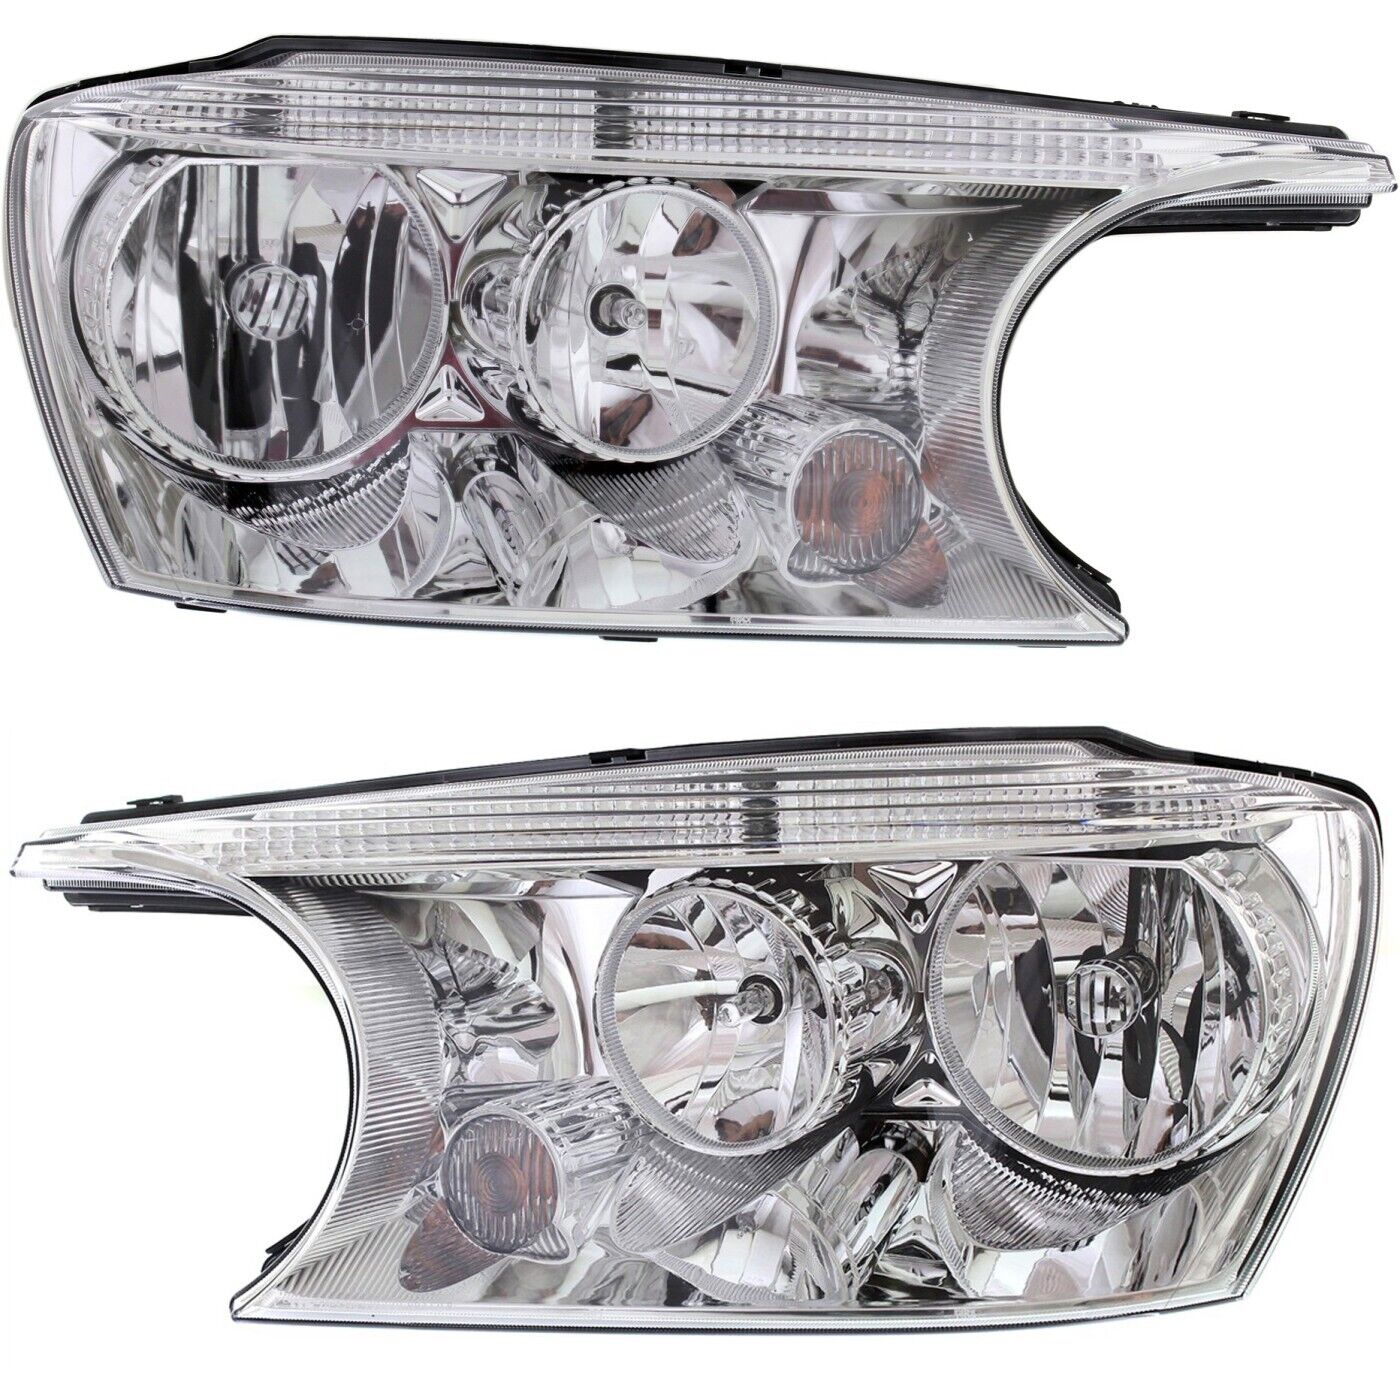 Headlight Set For 2004-2007 Buick Rainier Left and Right With Bulb 2Pc